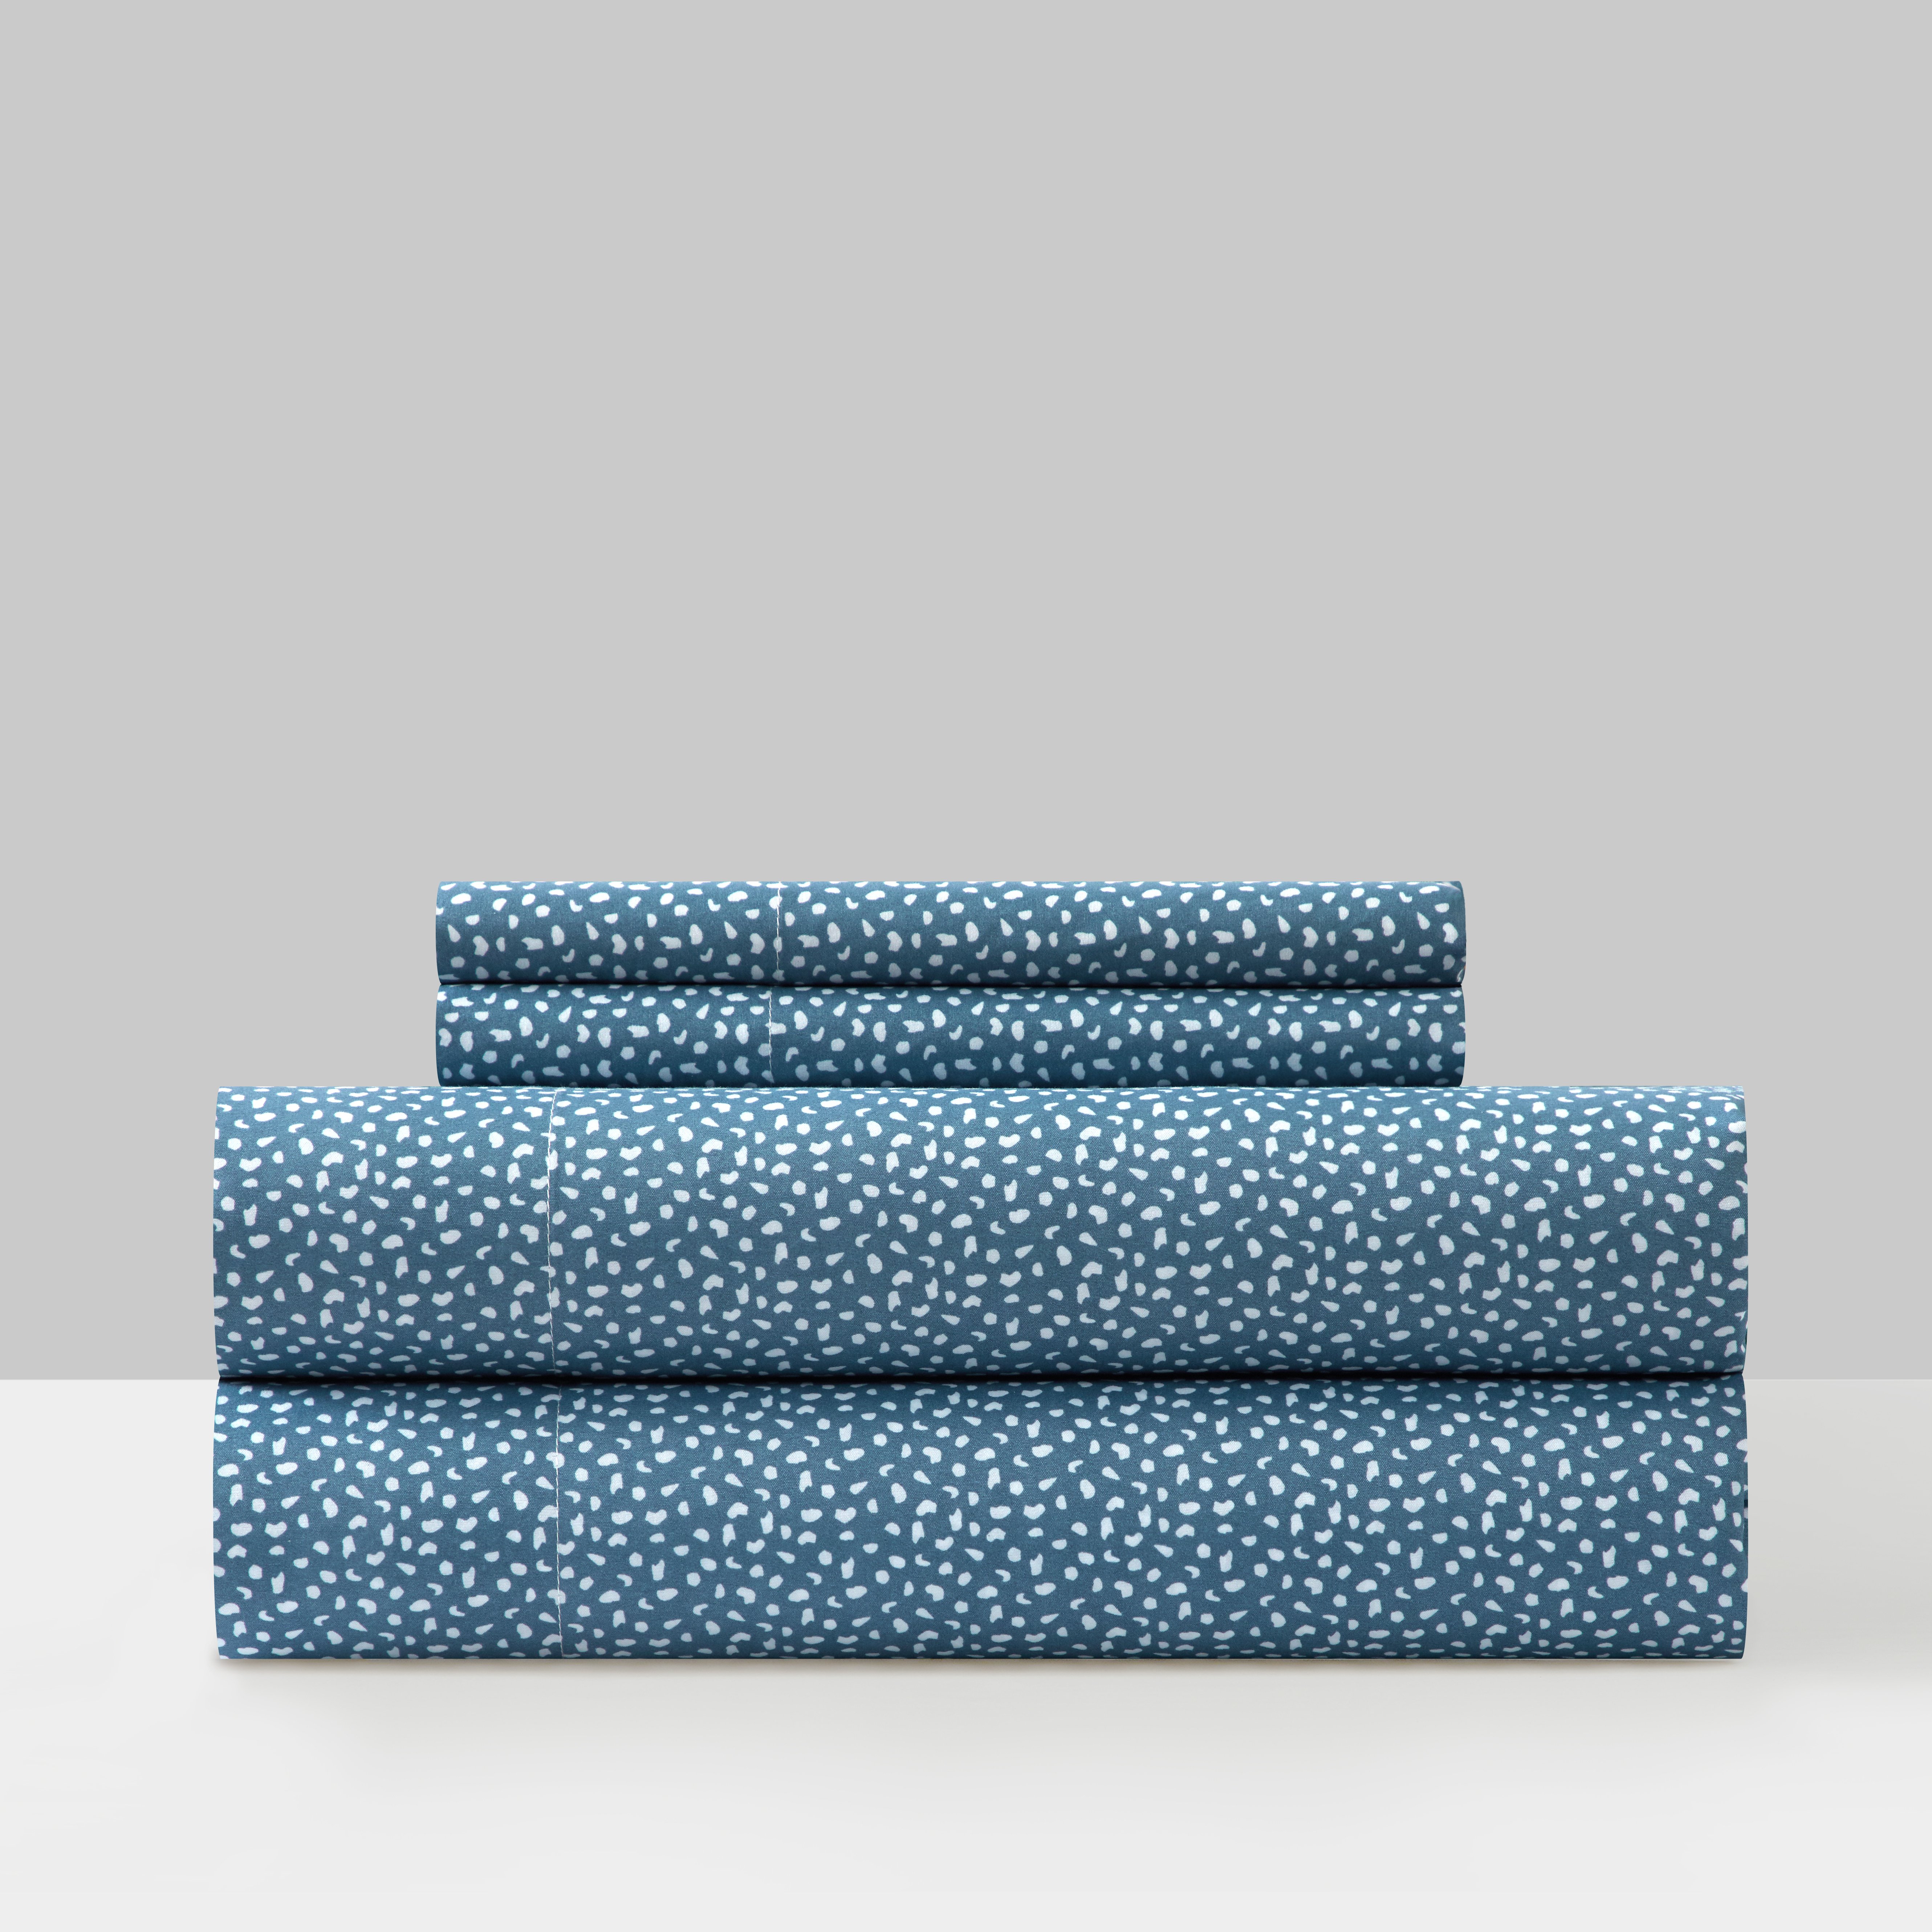 Dobe 3 Or 4 Piece Sheet Set Solid Color With White Spots Animal Pattern Print Design - Blue, King